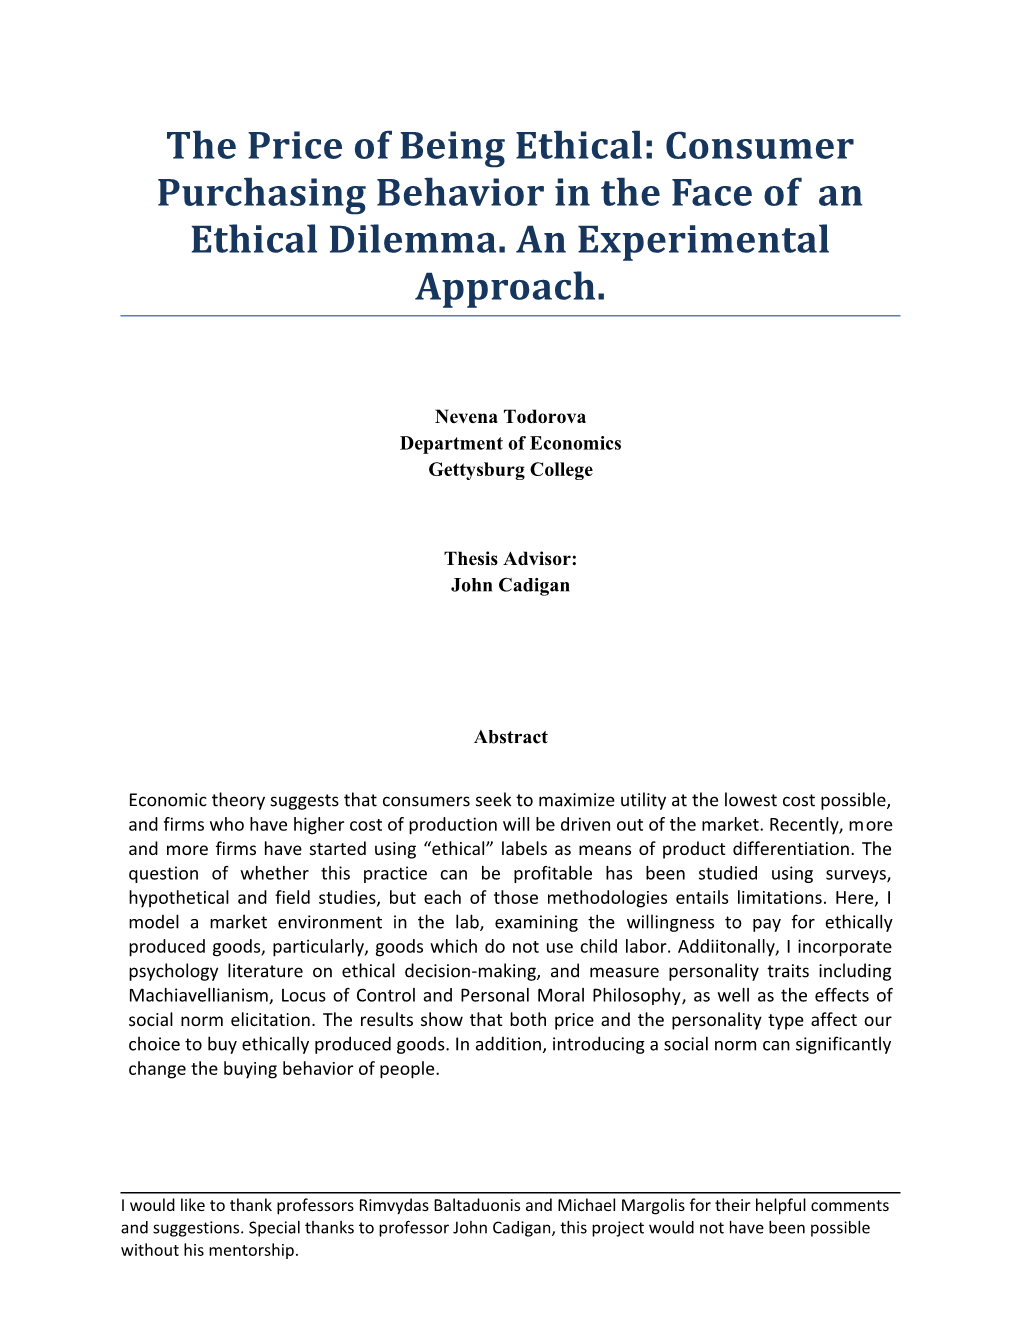 The Price of Being Ethical: Consumer Purchasing Behavior in the Face of an Ethical Dilemma